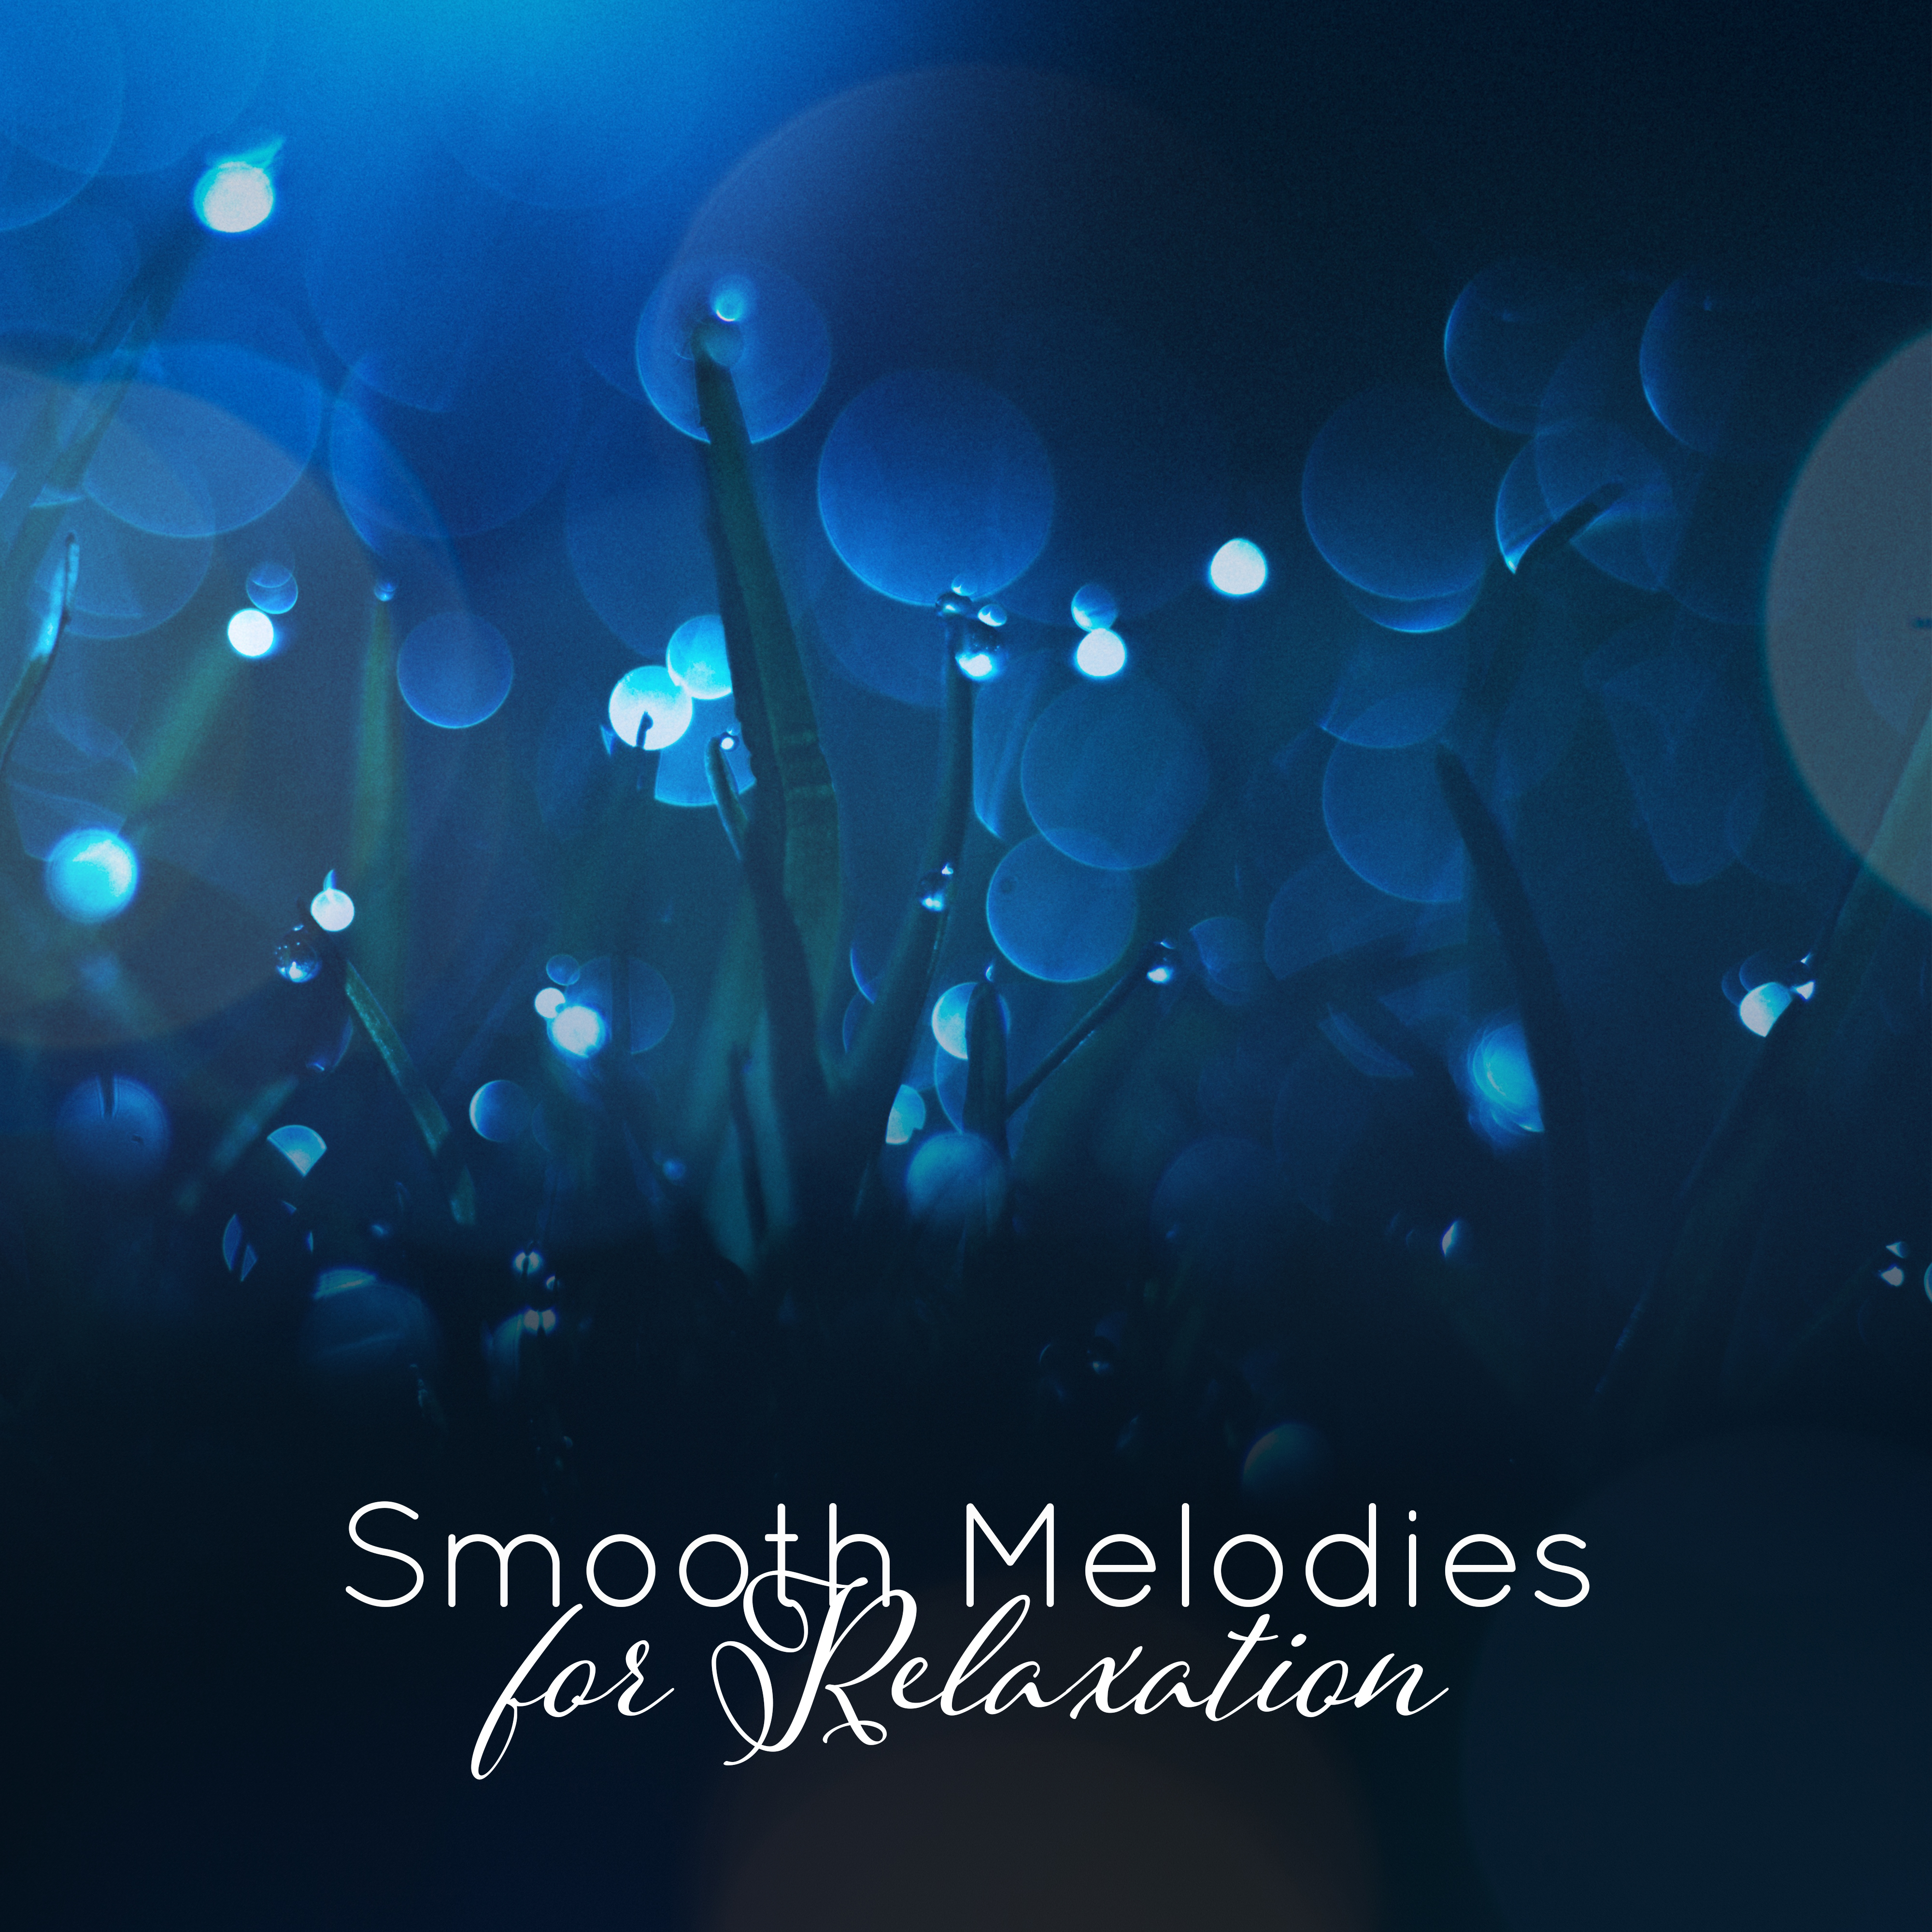 Smooth Melodies for Relaxation